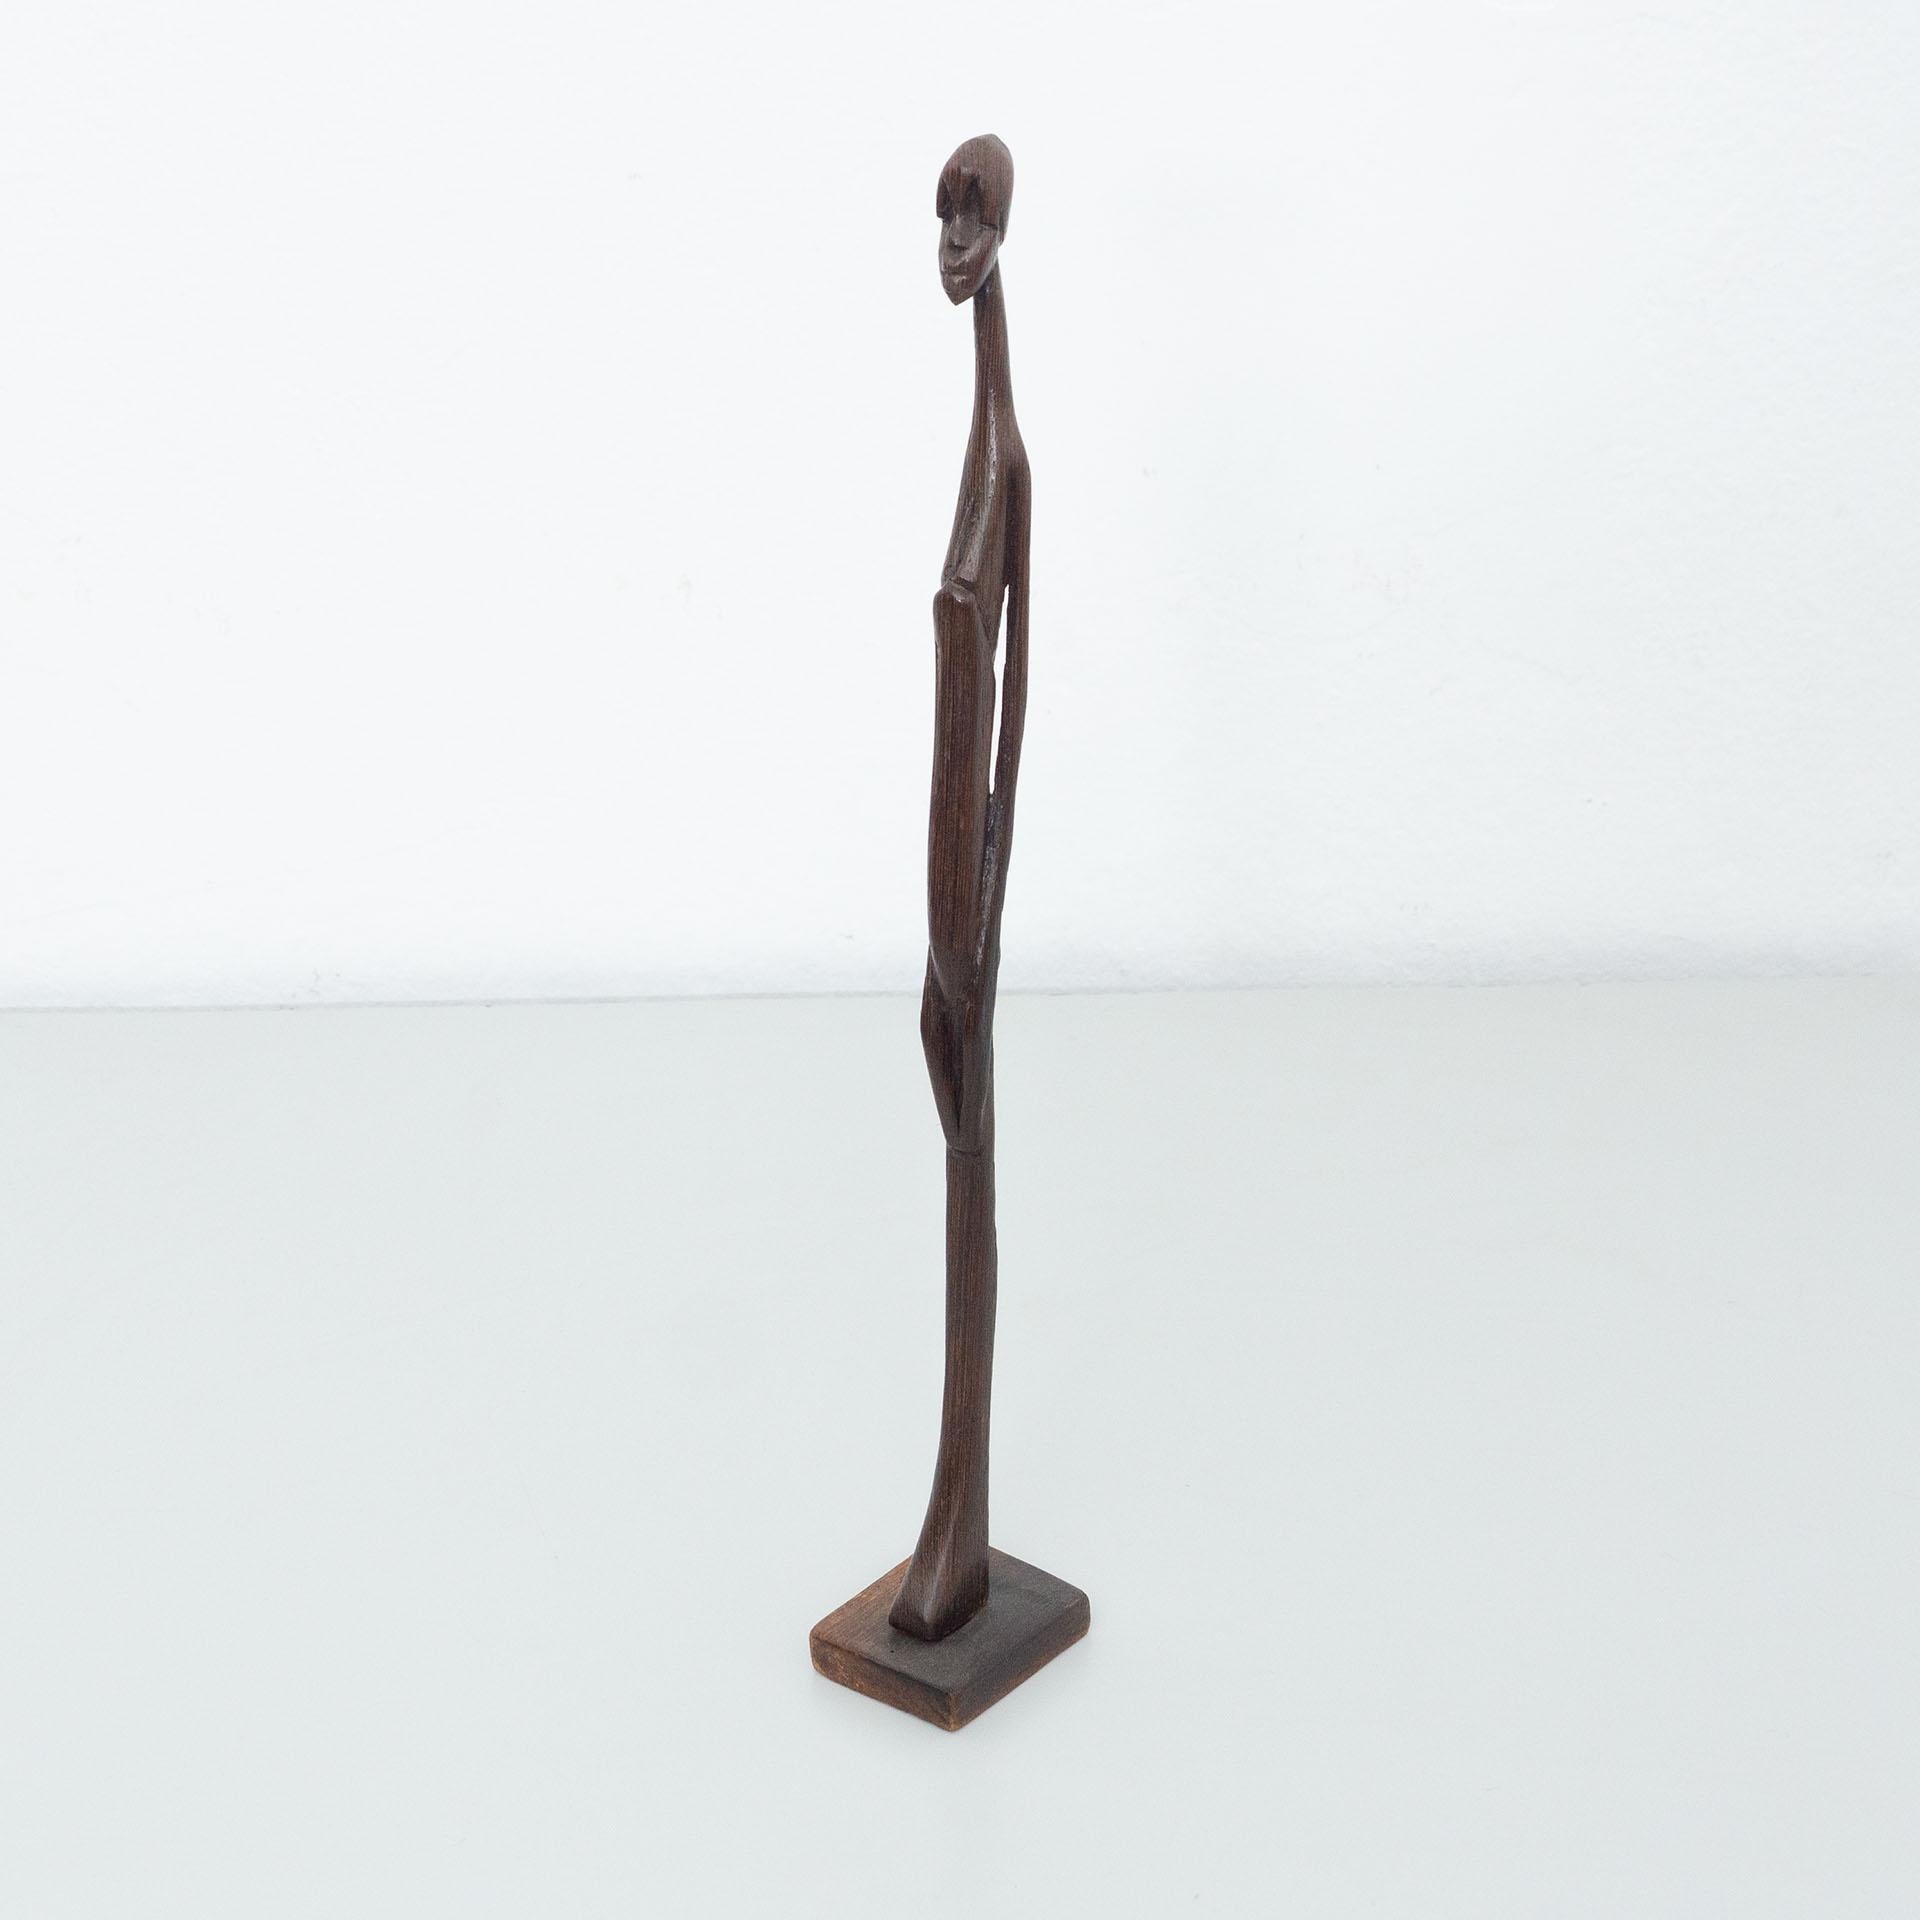 Other Early 20th Century African Wood Figurative Sculpture